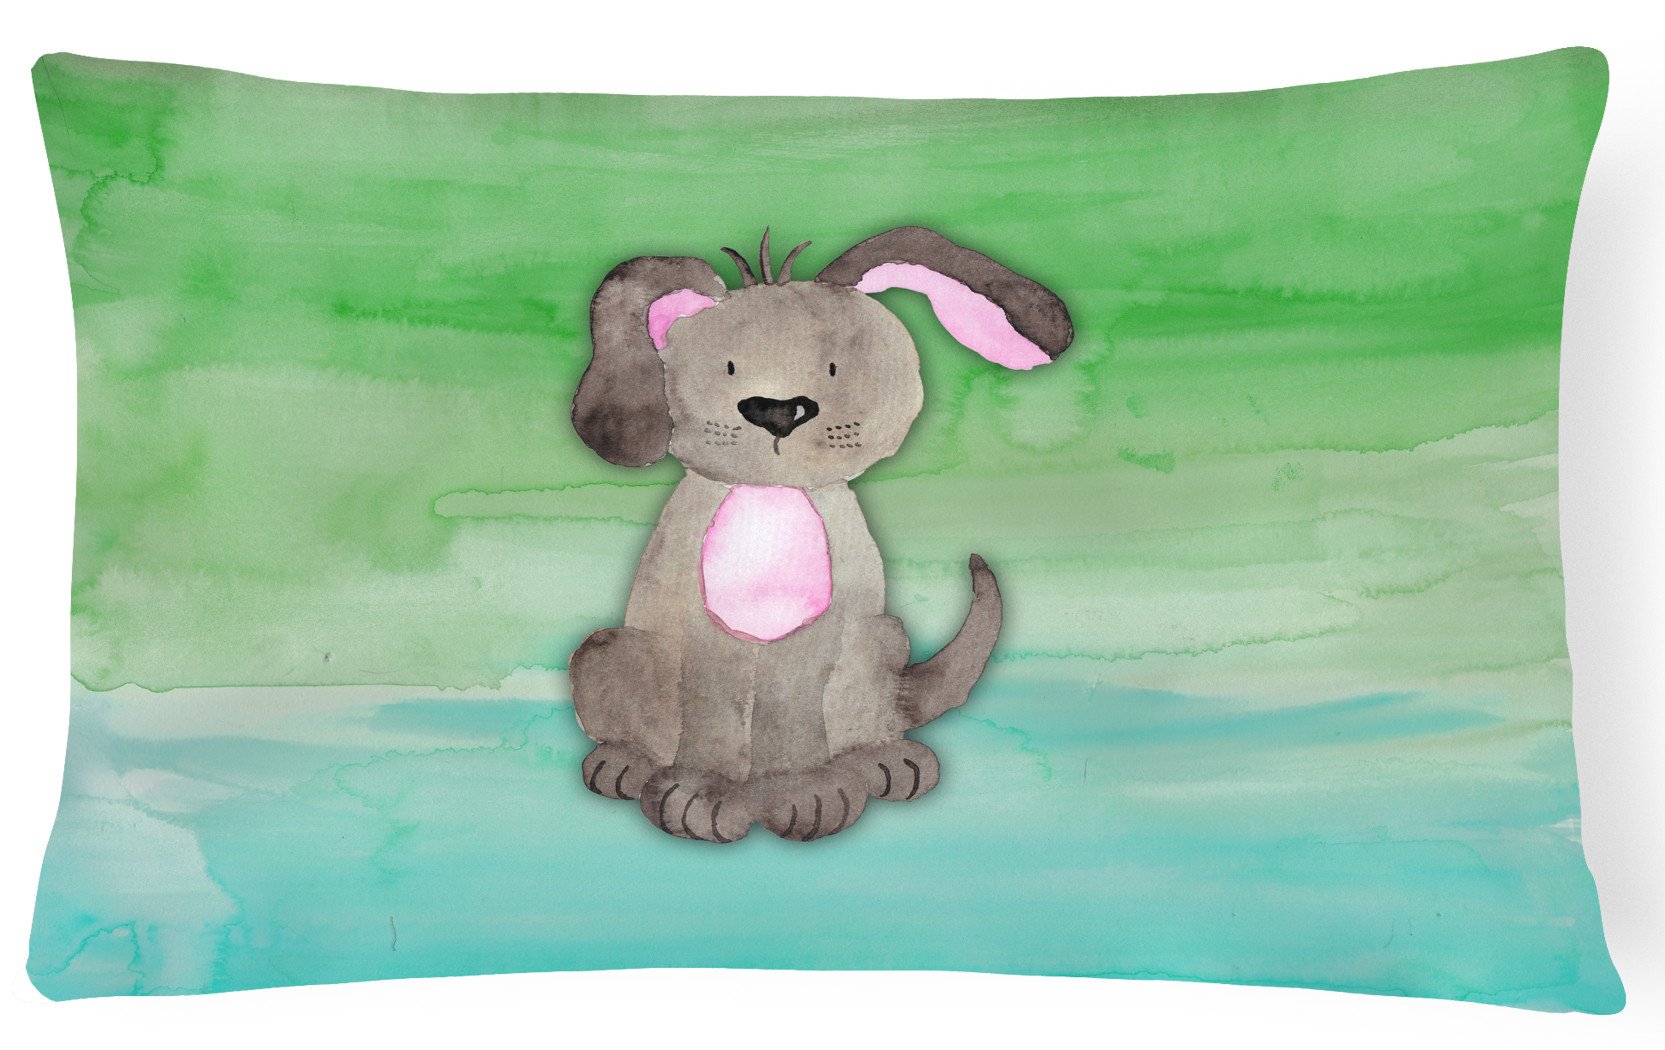 Dog Teal and Green Watercolor Canvas Fabric Decorative Pillow BB7357PW1216 by Caroline's Treasures